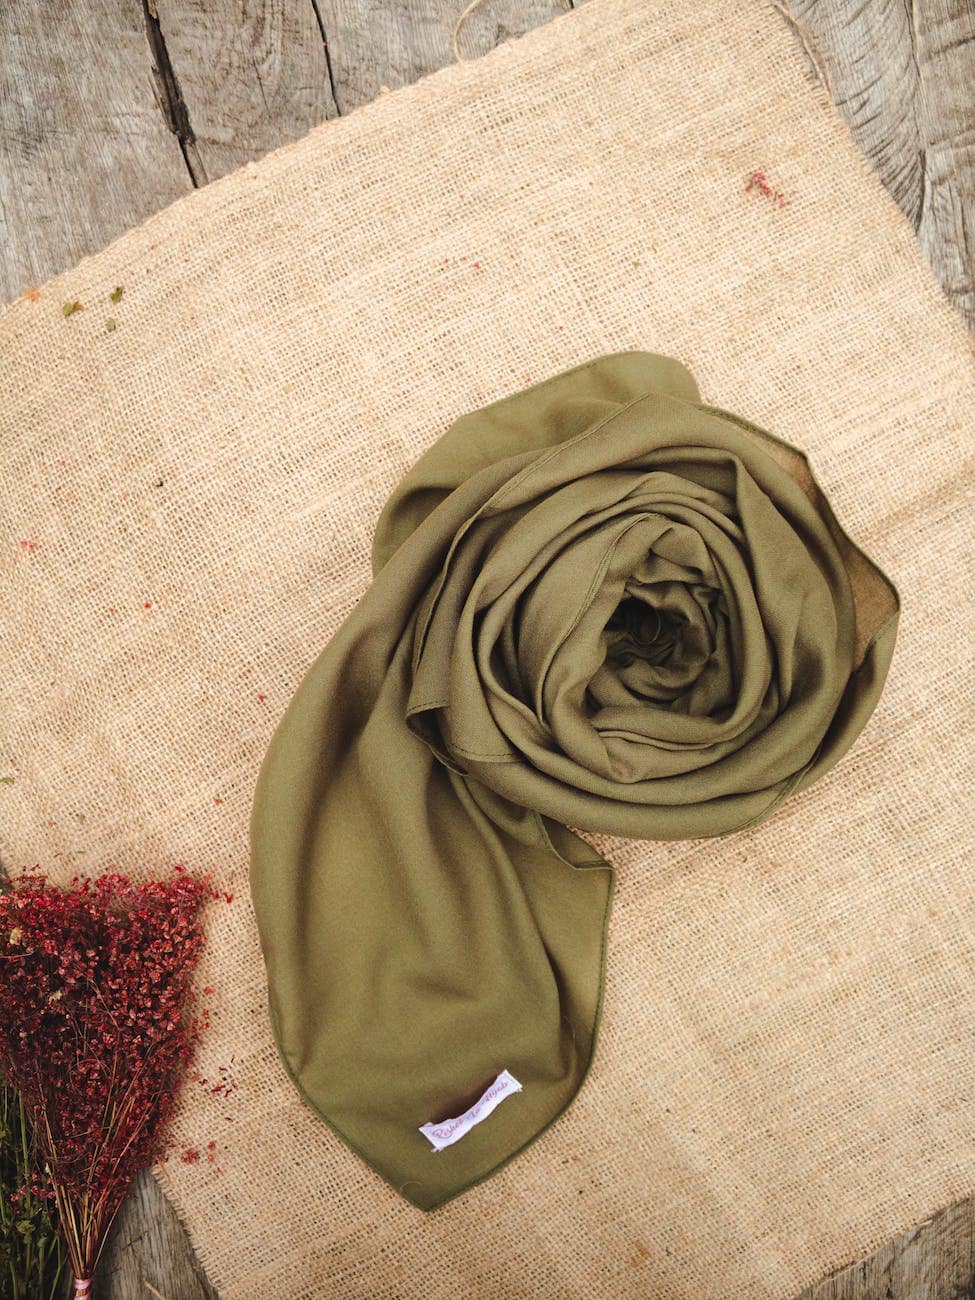 trendy silk scarf placed near flowers on table